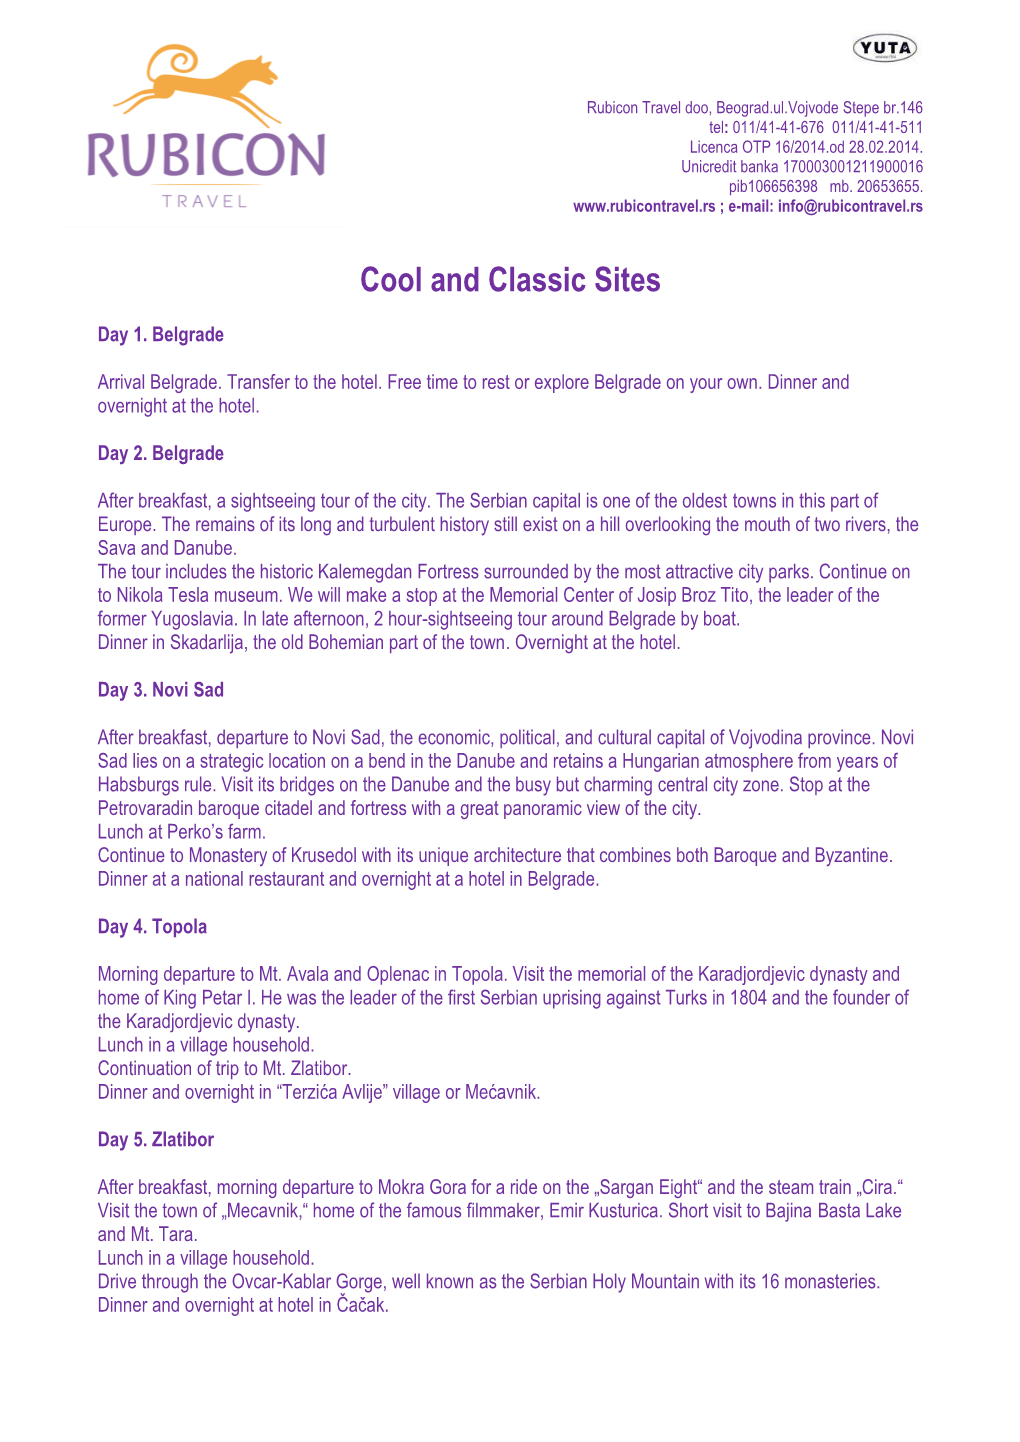 Cool and Classic Sites